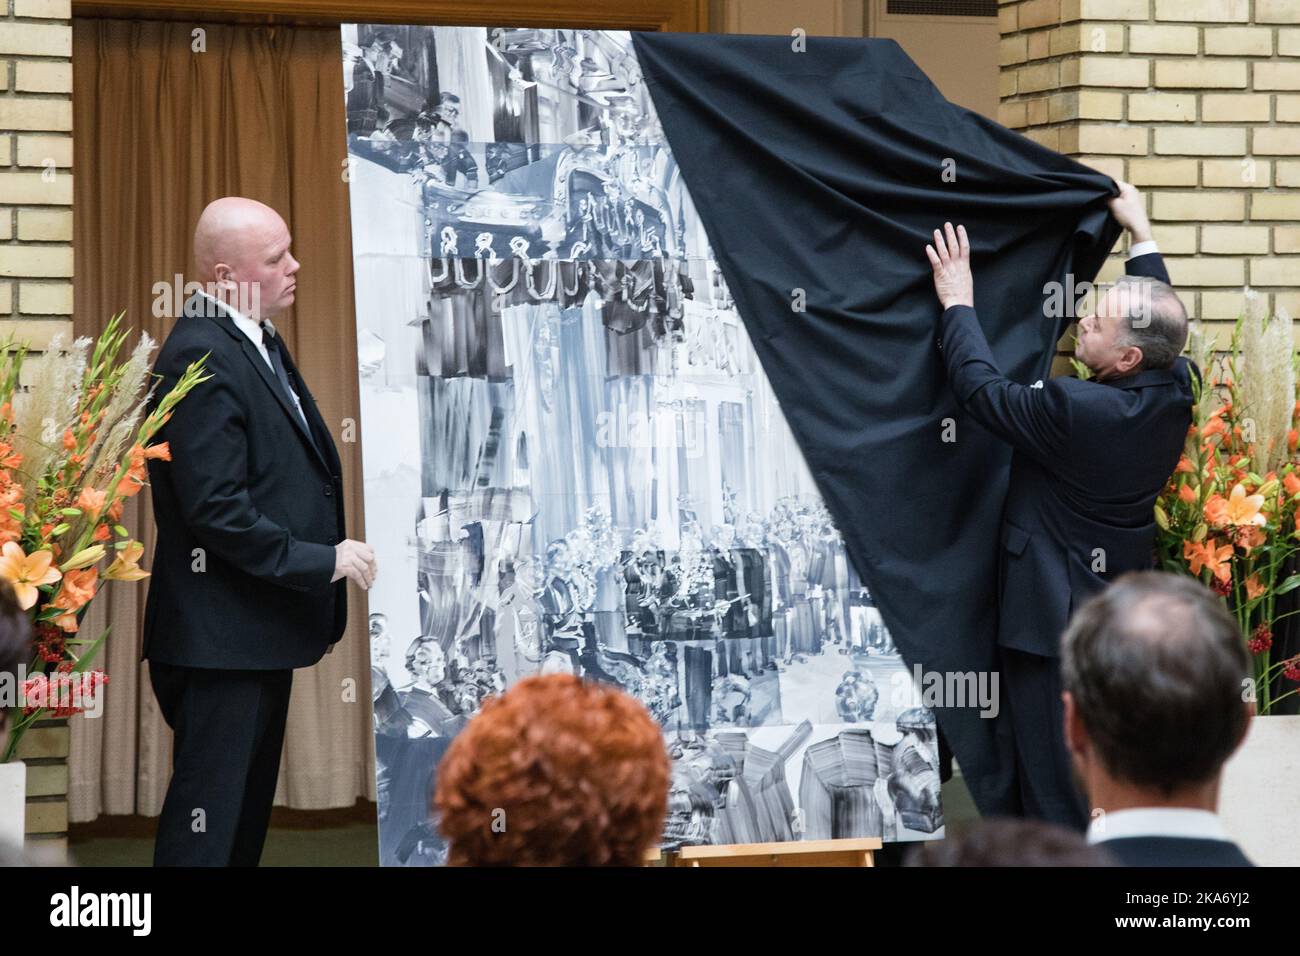 Oslo, Norway 20170918. President of the Storting Olemic Thommessen during the unveiling of the King and Queen's 80th anniversary gift from the Storting (Parliament) on Monday. The gift is a painting by Kira Wager called 'King Olav V's Oath for the Storting'. Photo: Audun Braastad / NTB scanpix Stock Photo